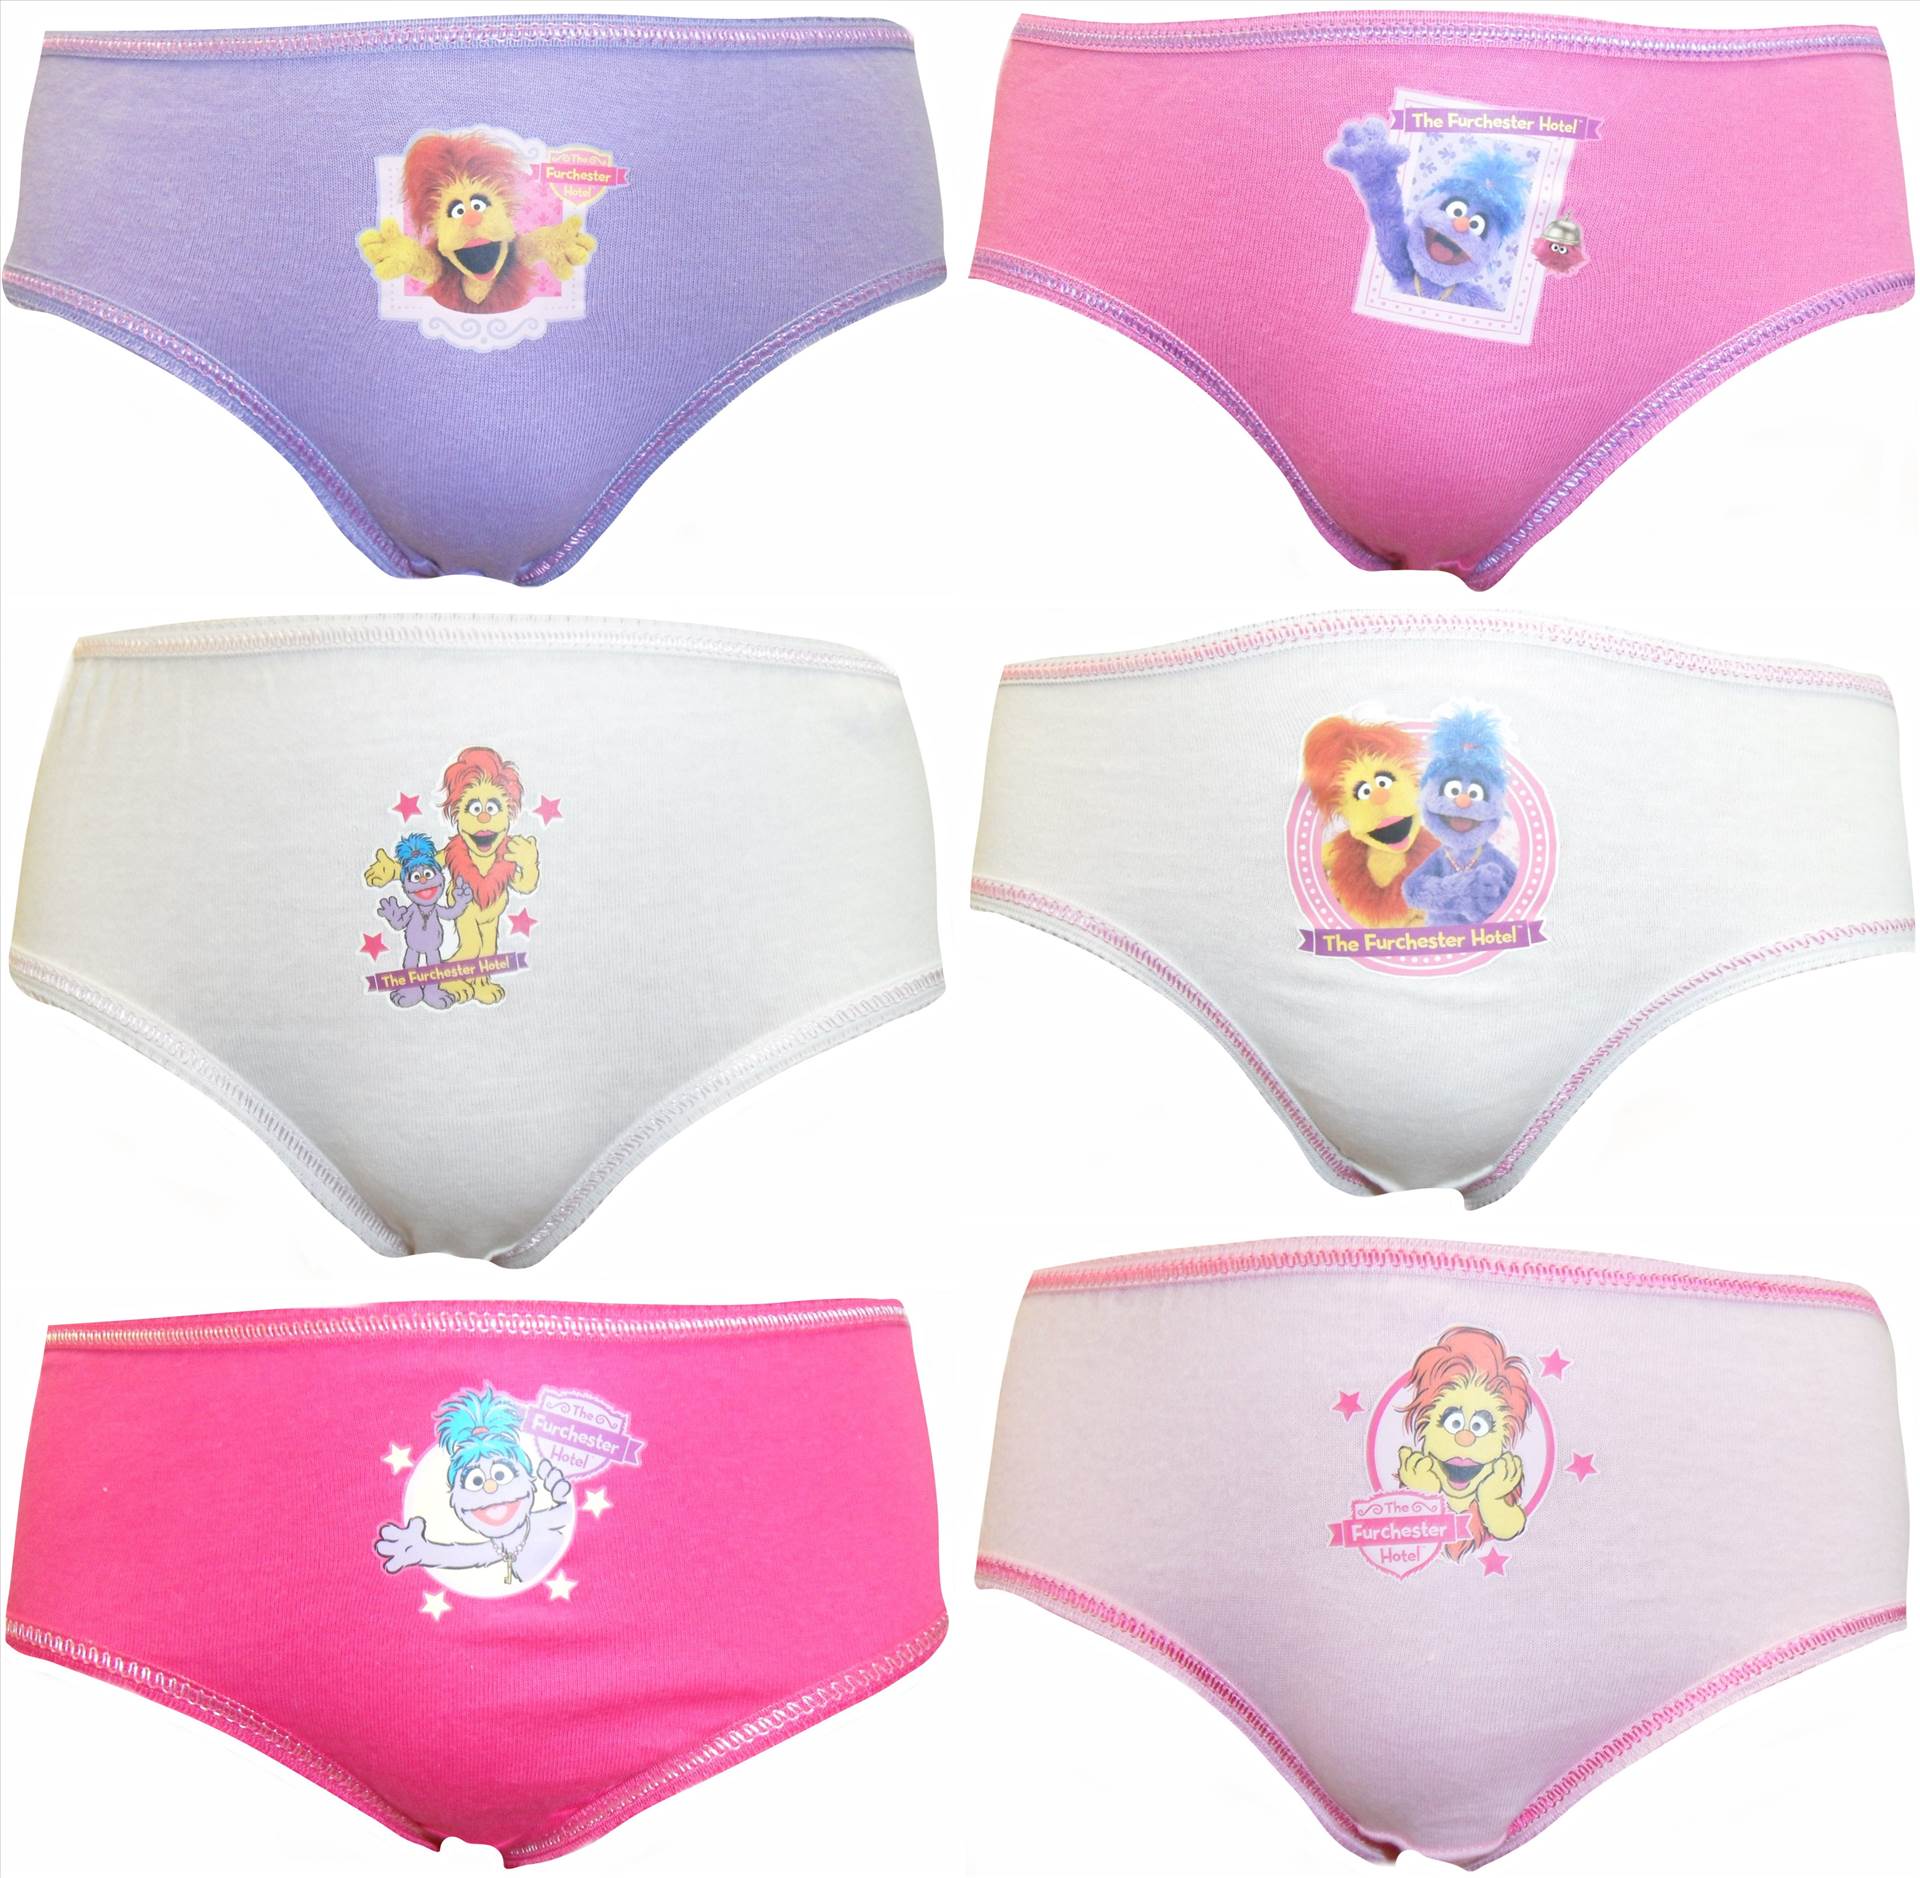 Furchester Hotel Girls Knickers GUW18 a.JPG  by Thingimijigs